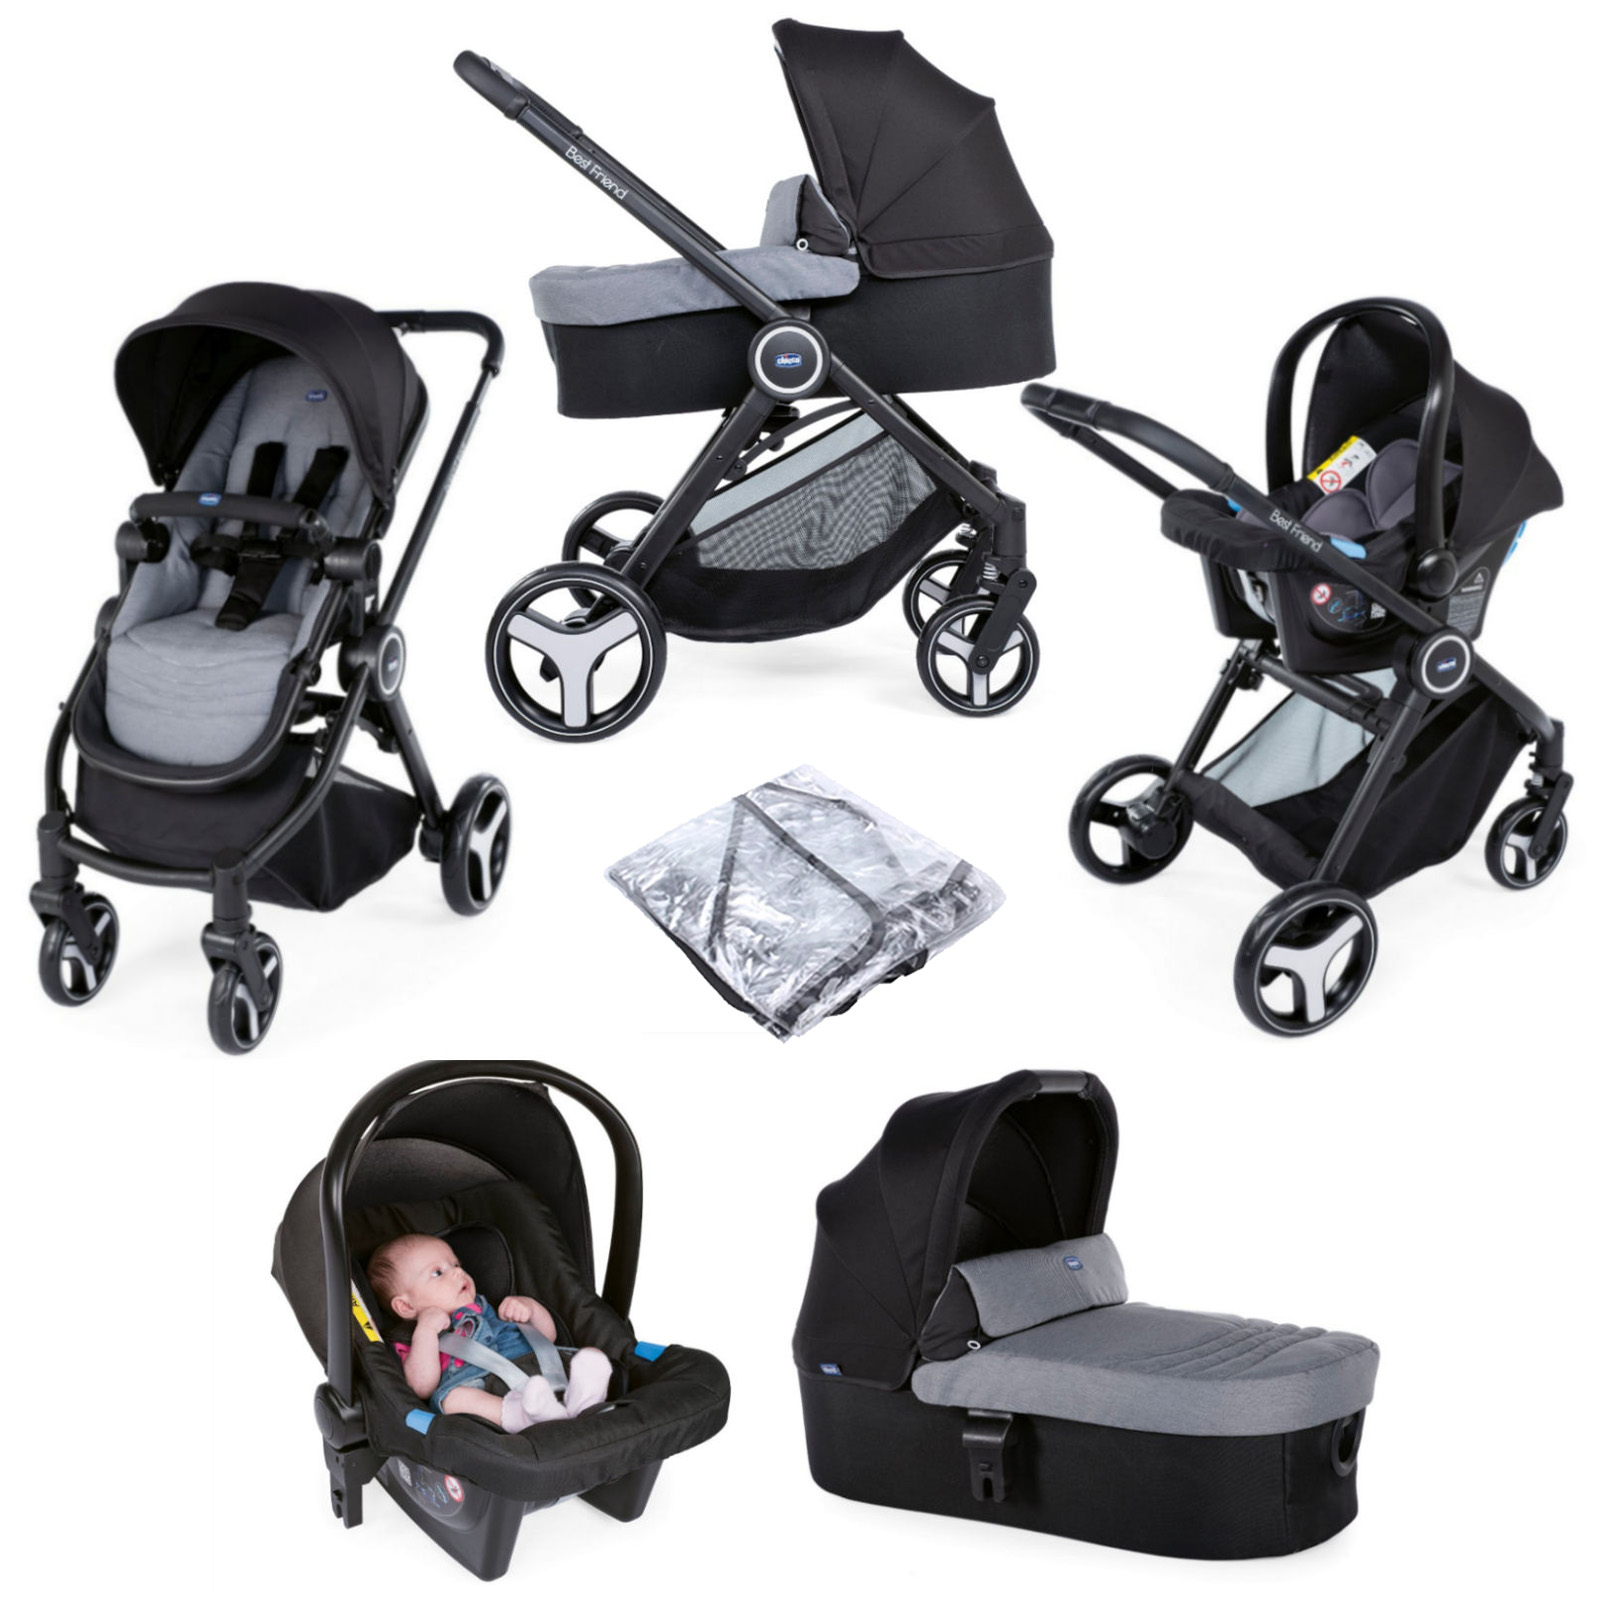 chicco best friend travel system reviews